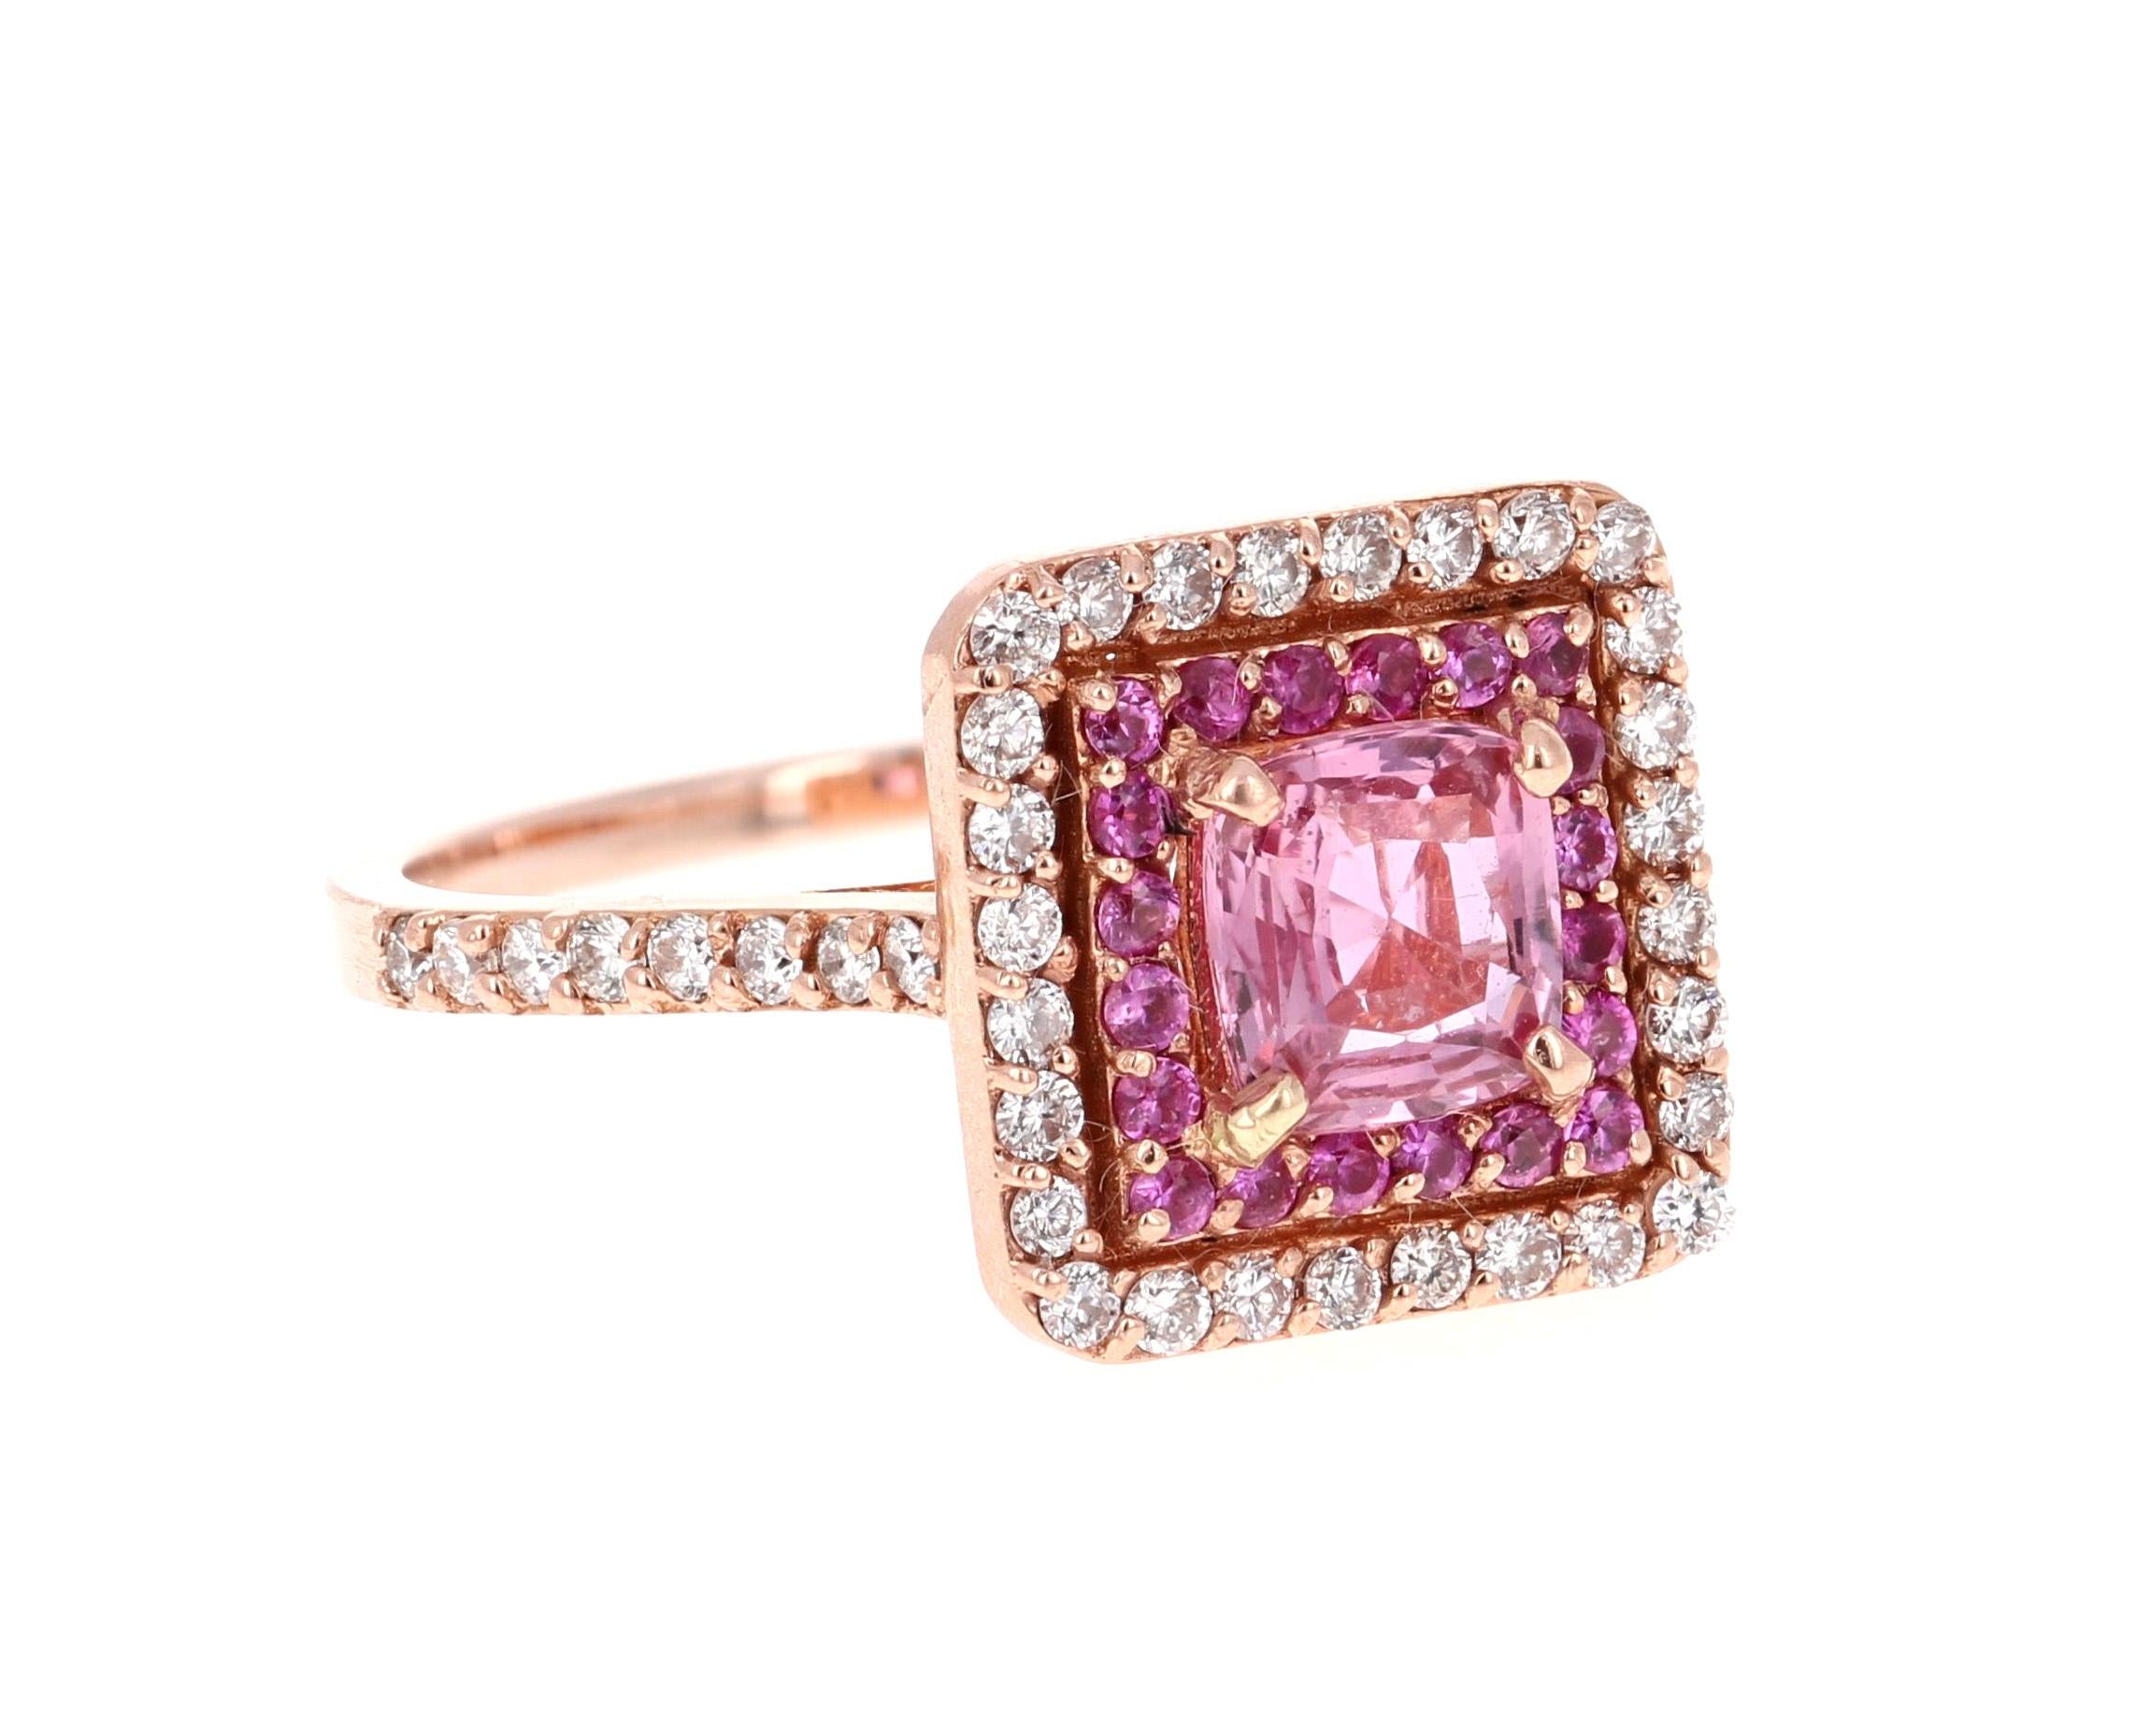 Simply the most elegant and beautiful Pink Sapphire and Diamond Engagement or Wedding Ring!

The center Cushion Cut Pink Sapphire is 1.02 Carats and is surrounded by a halo of 20 Pink Sapphires that weigh 0.23 Carats, followed by another halo of 44